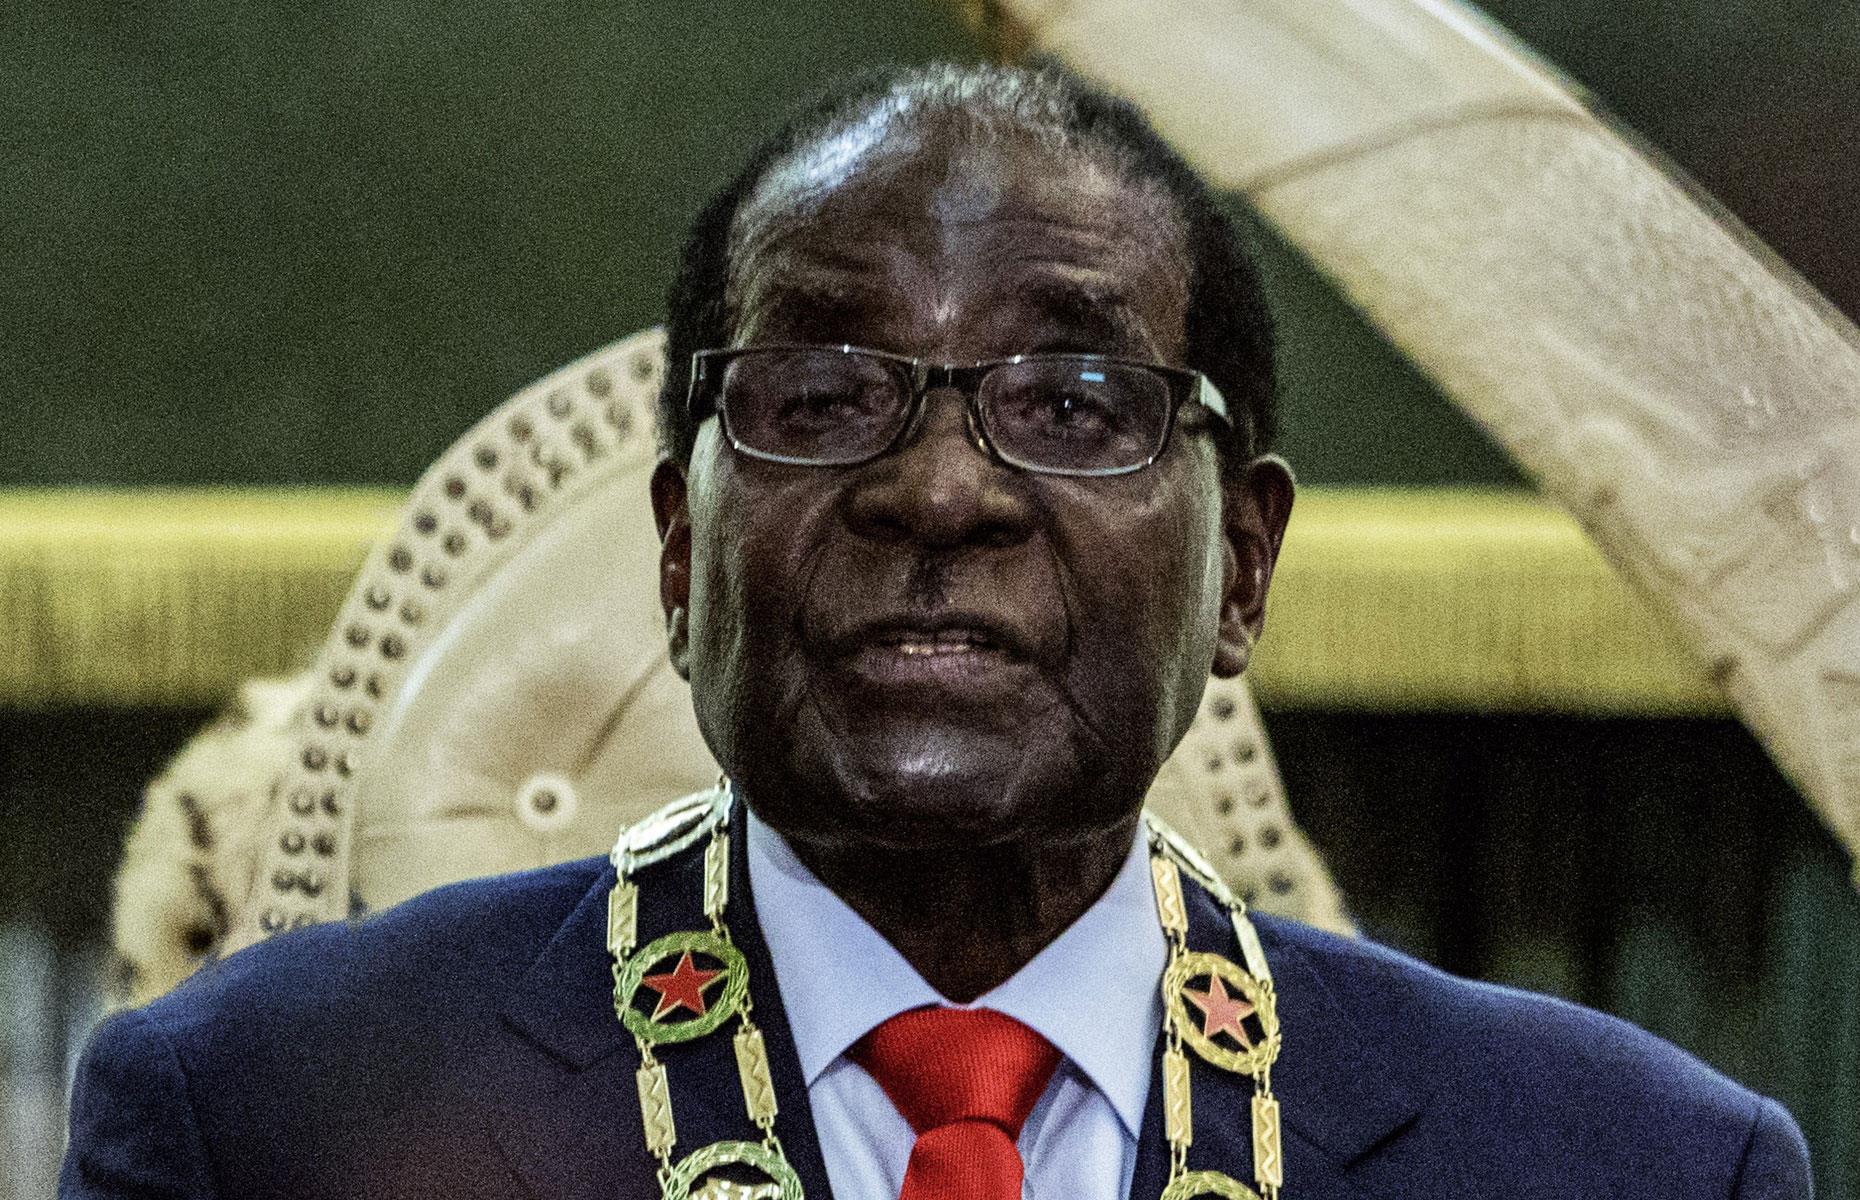 <p>Prime minister between 1980 and 1987, Robert Mugabe then became president of Zimbabwe in 1987 until 2017. During this time he presided over the economic collapse of the once affluent nation, which he plundered to enrich himself and his family. Leaked US diplomatic cables published by <em>Wikileaks</em> show the late infamous leader, who owned a number of farms and luxury residences, was estimated as being worth more than $1 billion in 2001. When adjusted for inflation, that's $1.45 billion today. Mugabe died in 2019.</p>